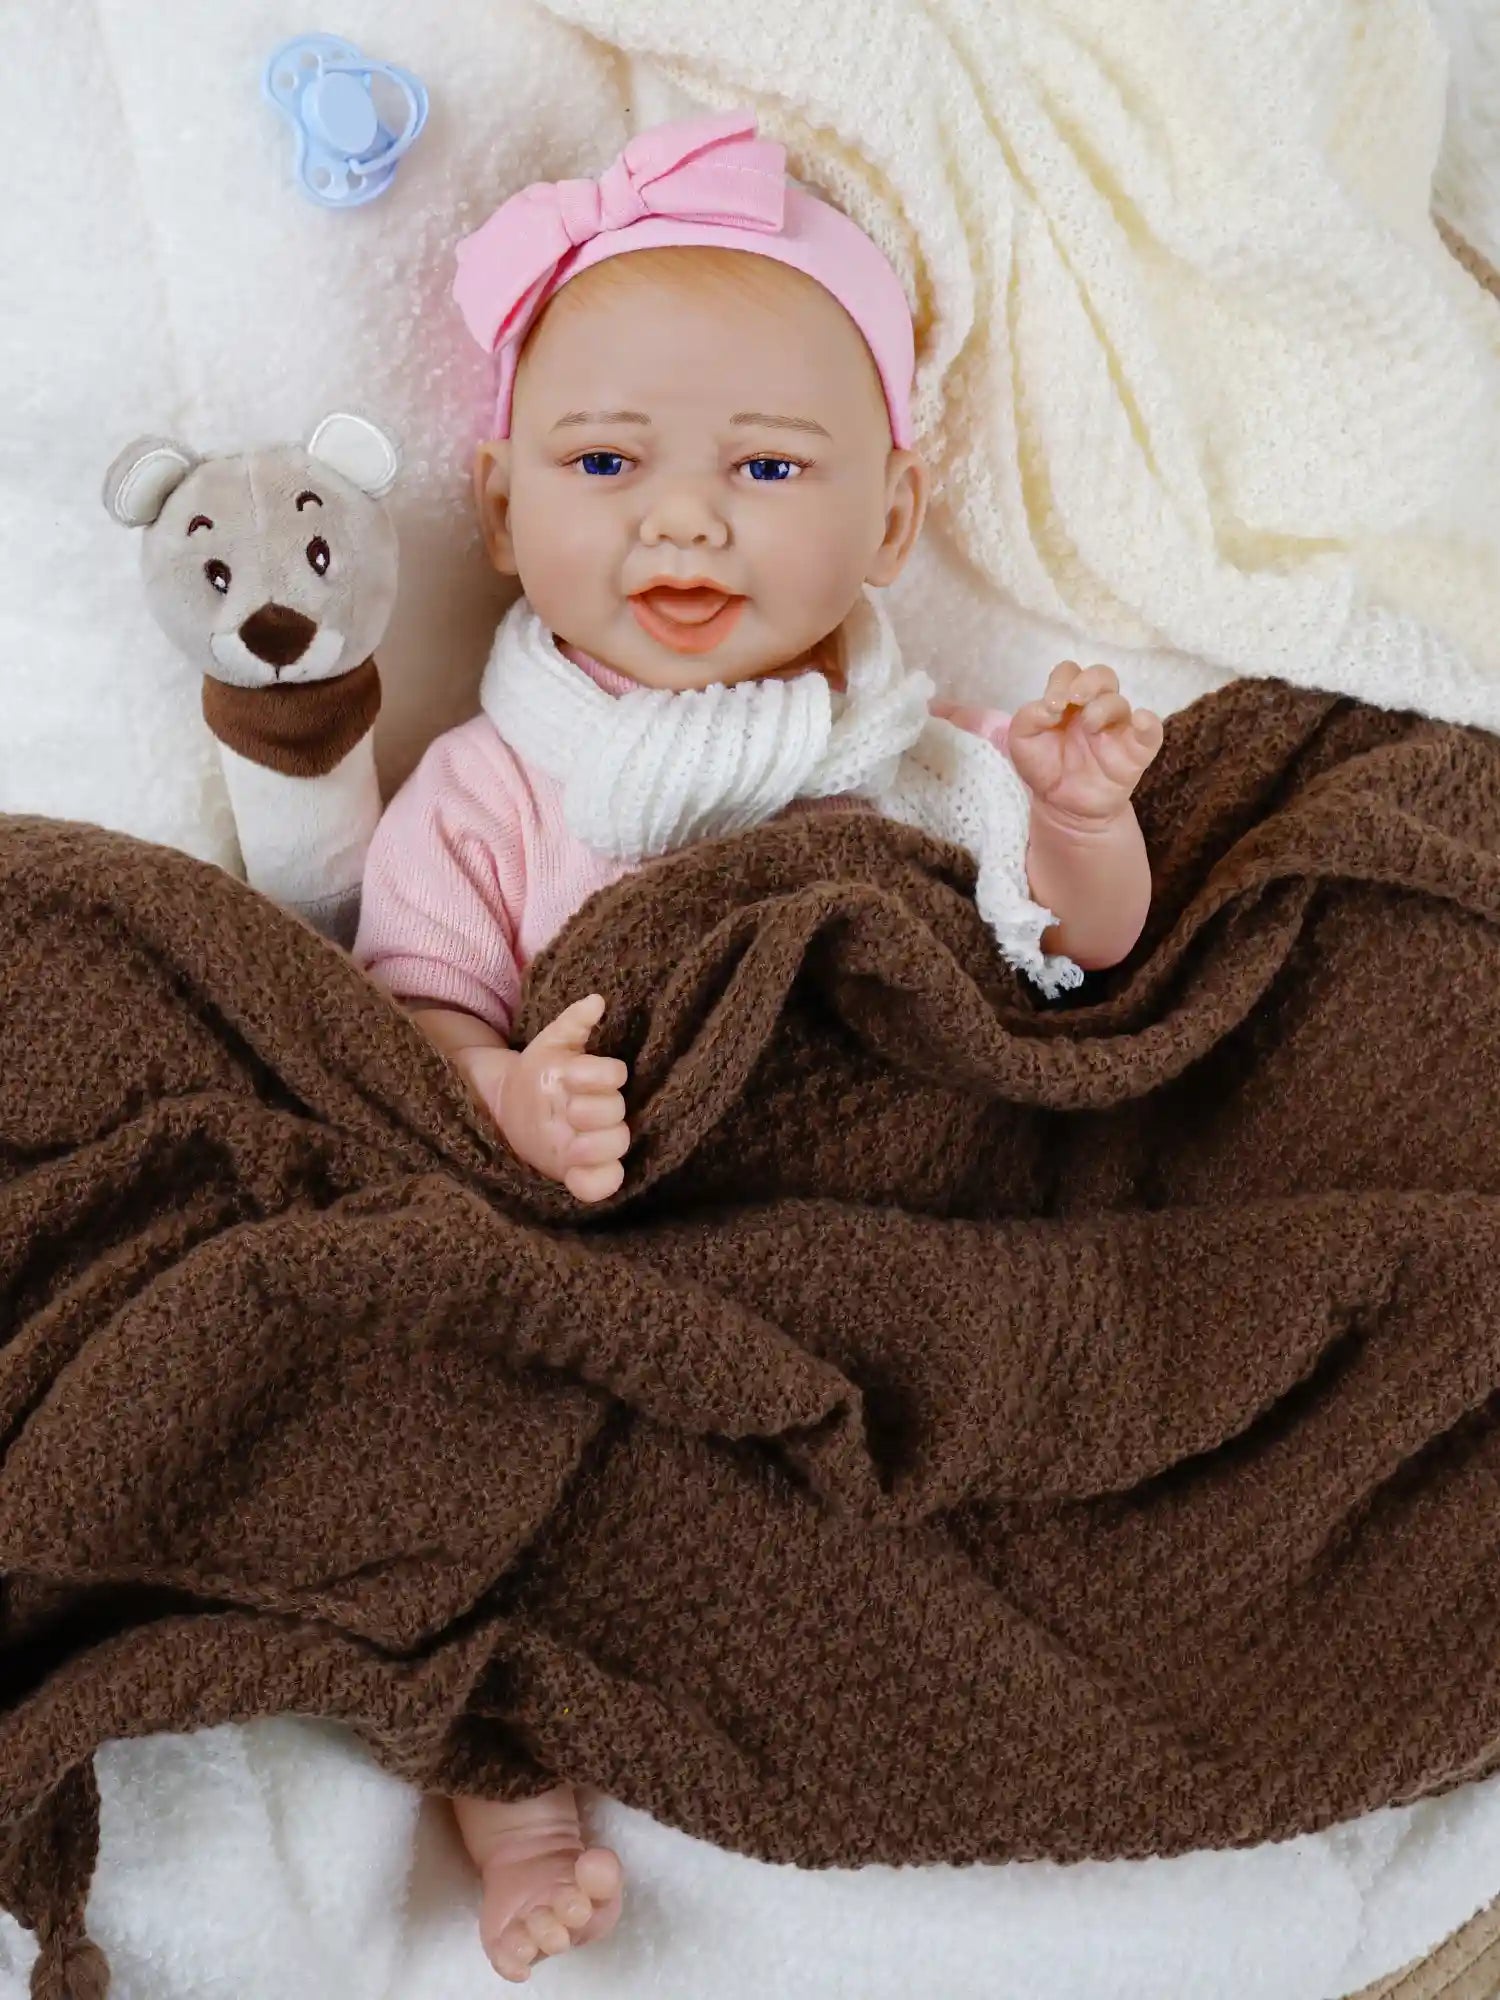 Smiling reborn baby doll wearing a white headband and beige dress, reclining on a white blanket with a brown blanket and plush bear toy, along with a blue pacifier